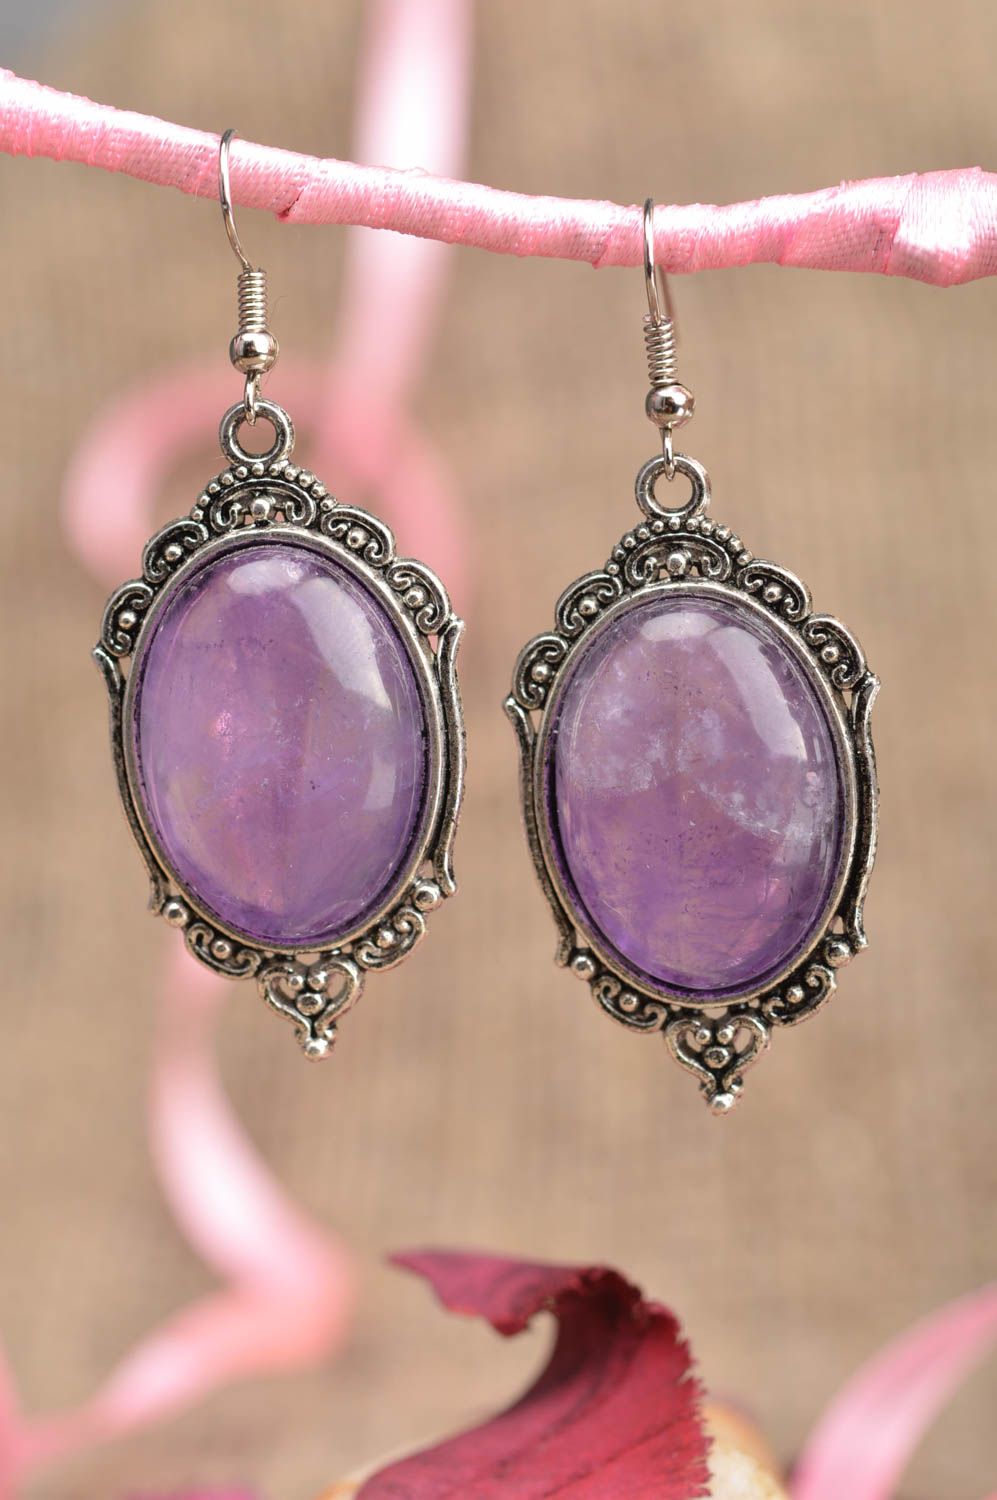 Handmade designer violet oval metal earrings with stone in vintage style photo 1